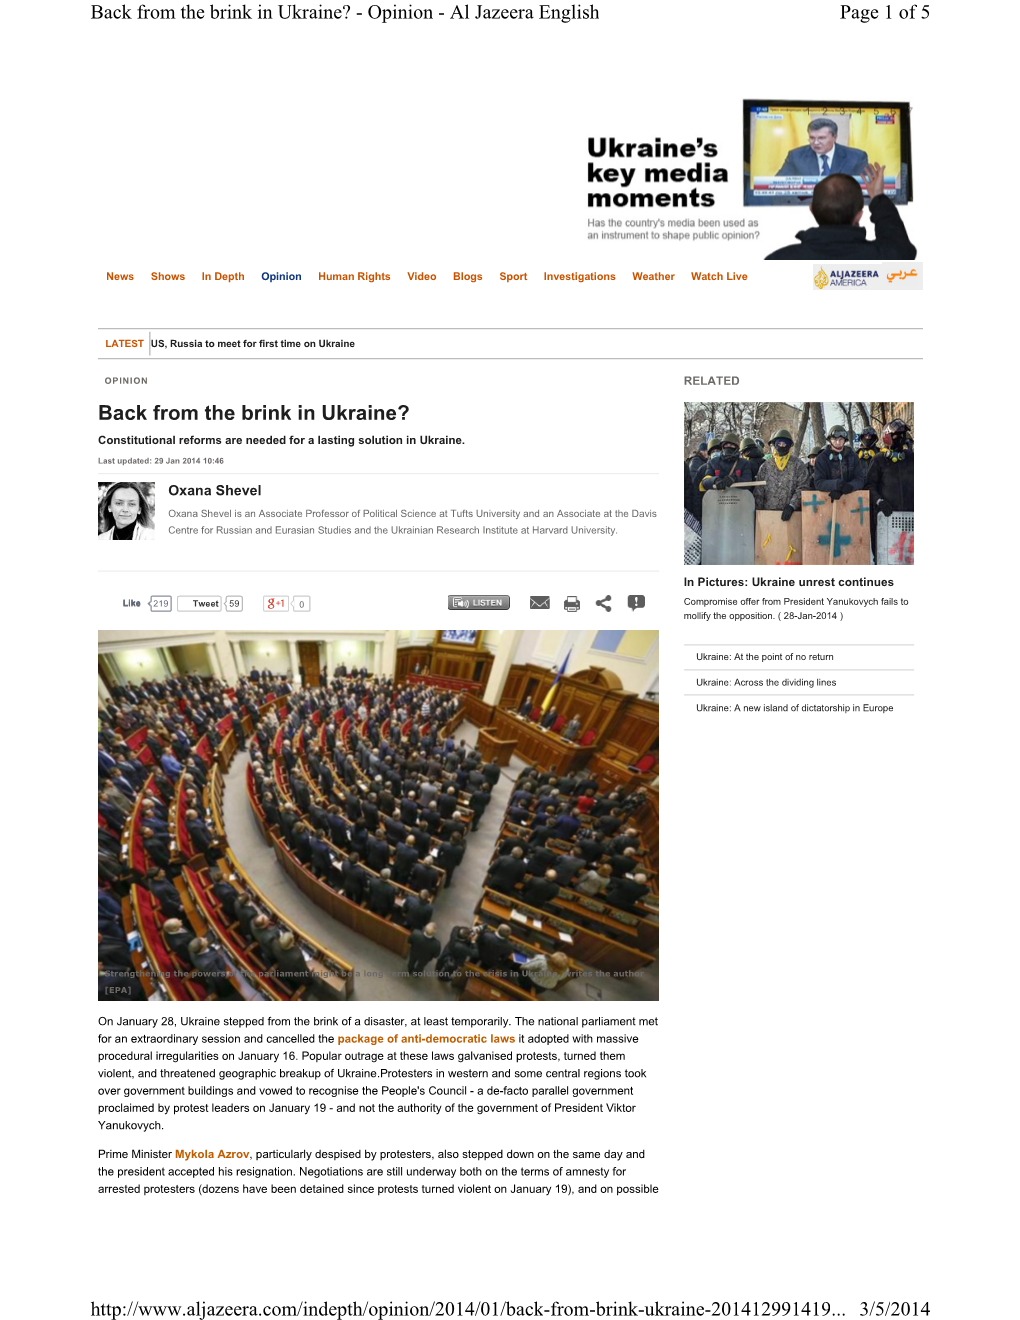 Back from the Brink in Ukraine? - Opinion - Al Jazeera English Page 1 of 5